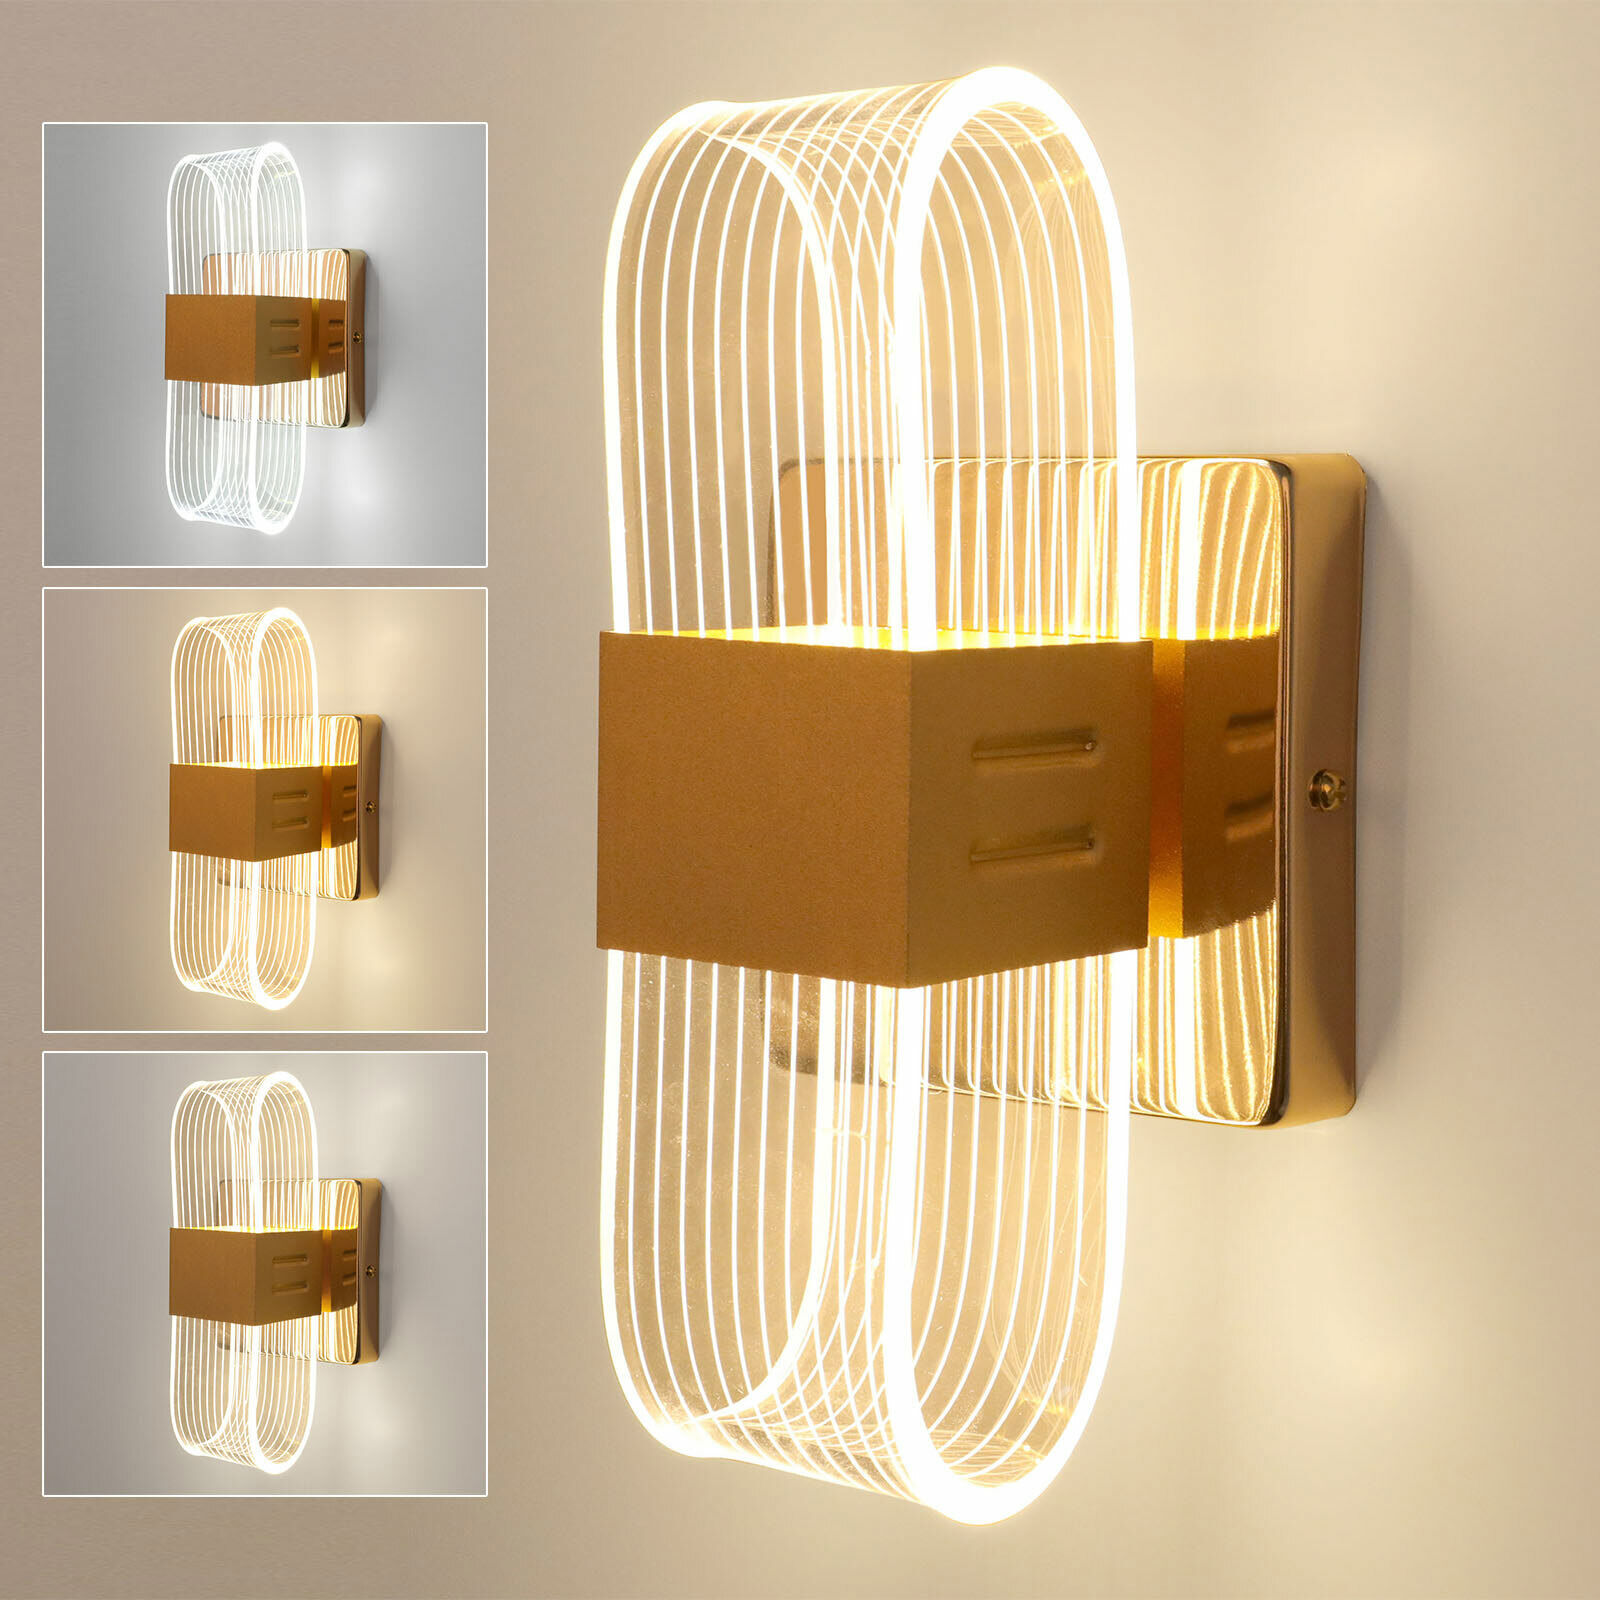 Dimmable LED Wall Lamp Modern Acrylic Sconce Living Room Bedroom Lighting Decor